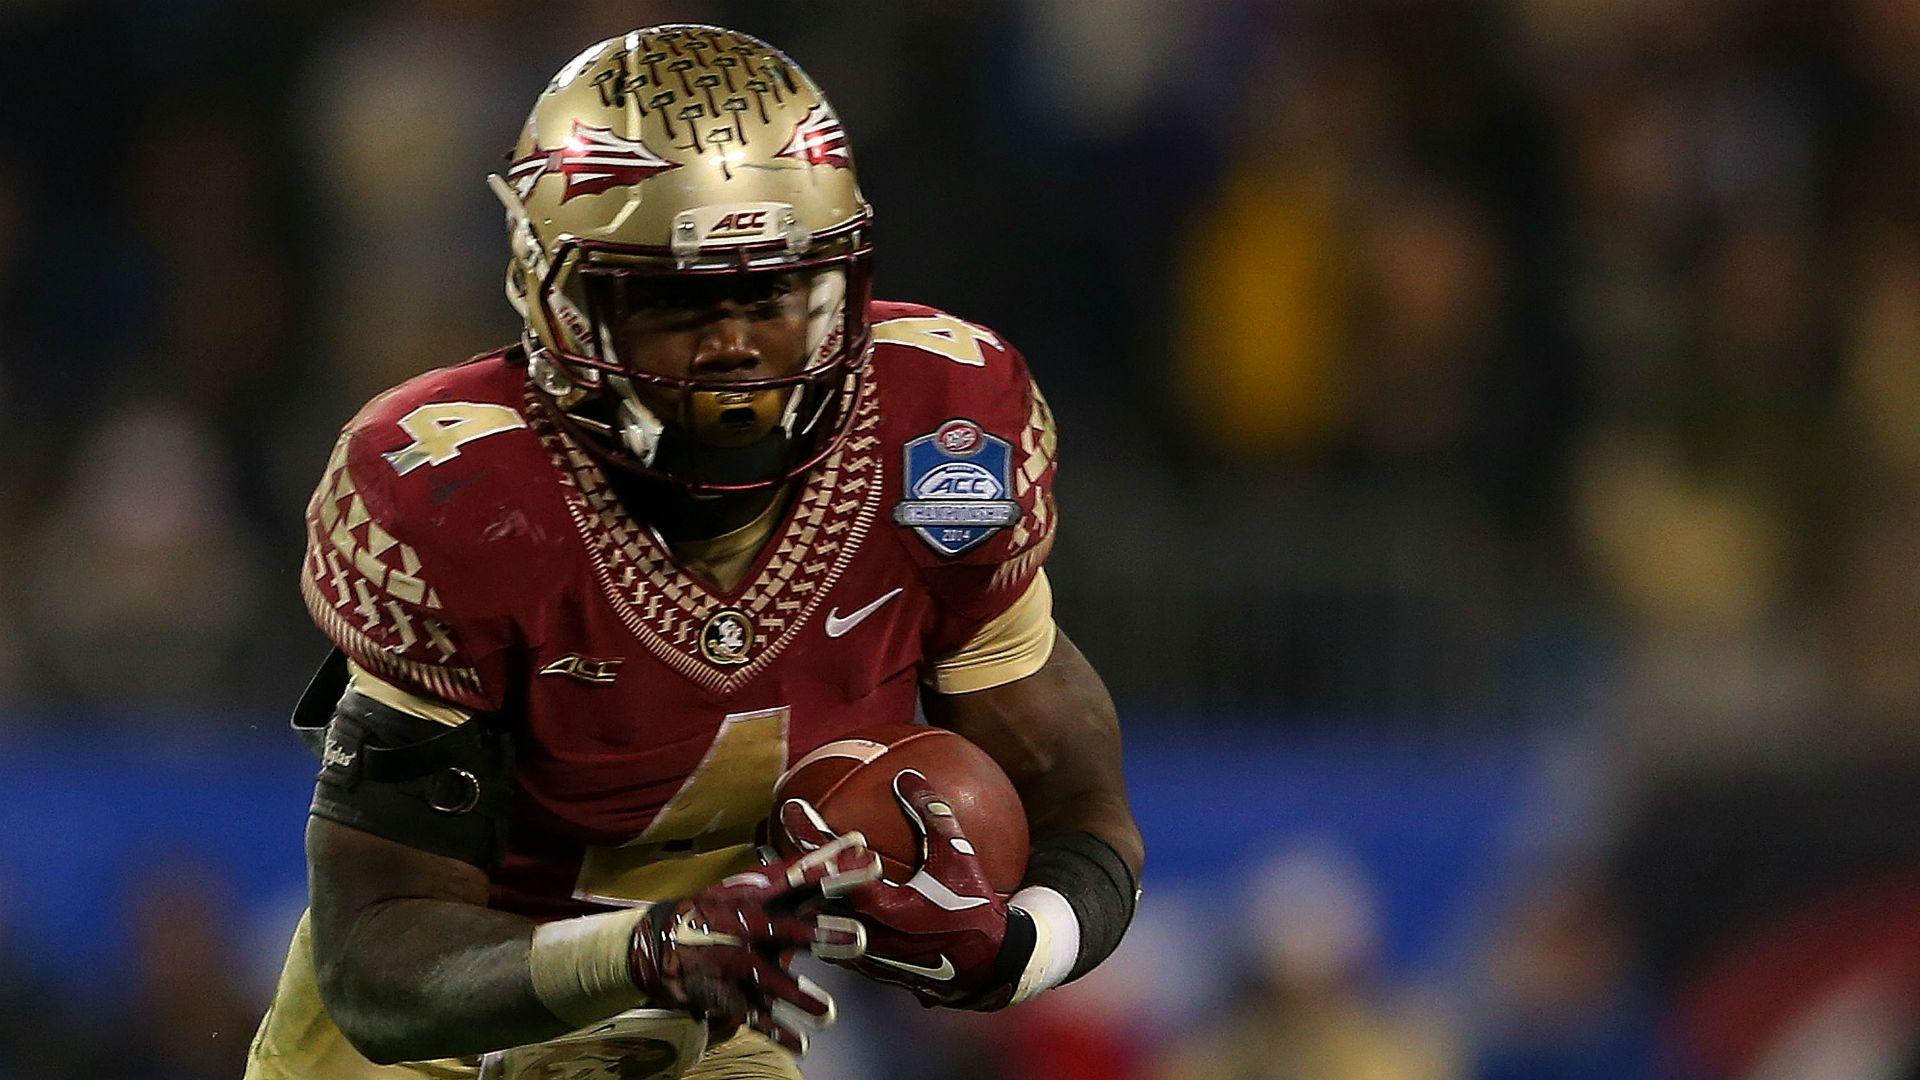 FSU RB Dalvin Cook facing arrest, will be charged with battery